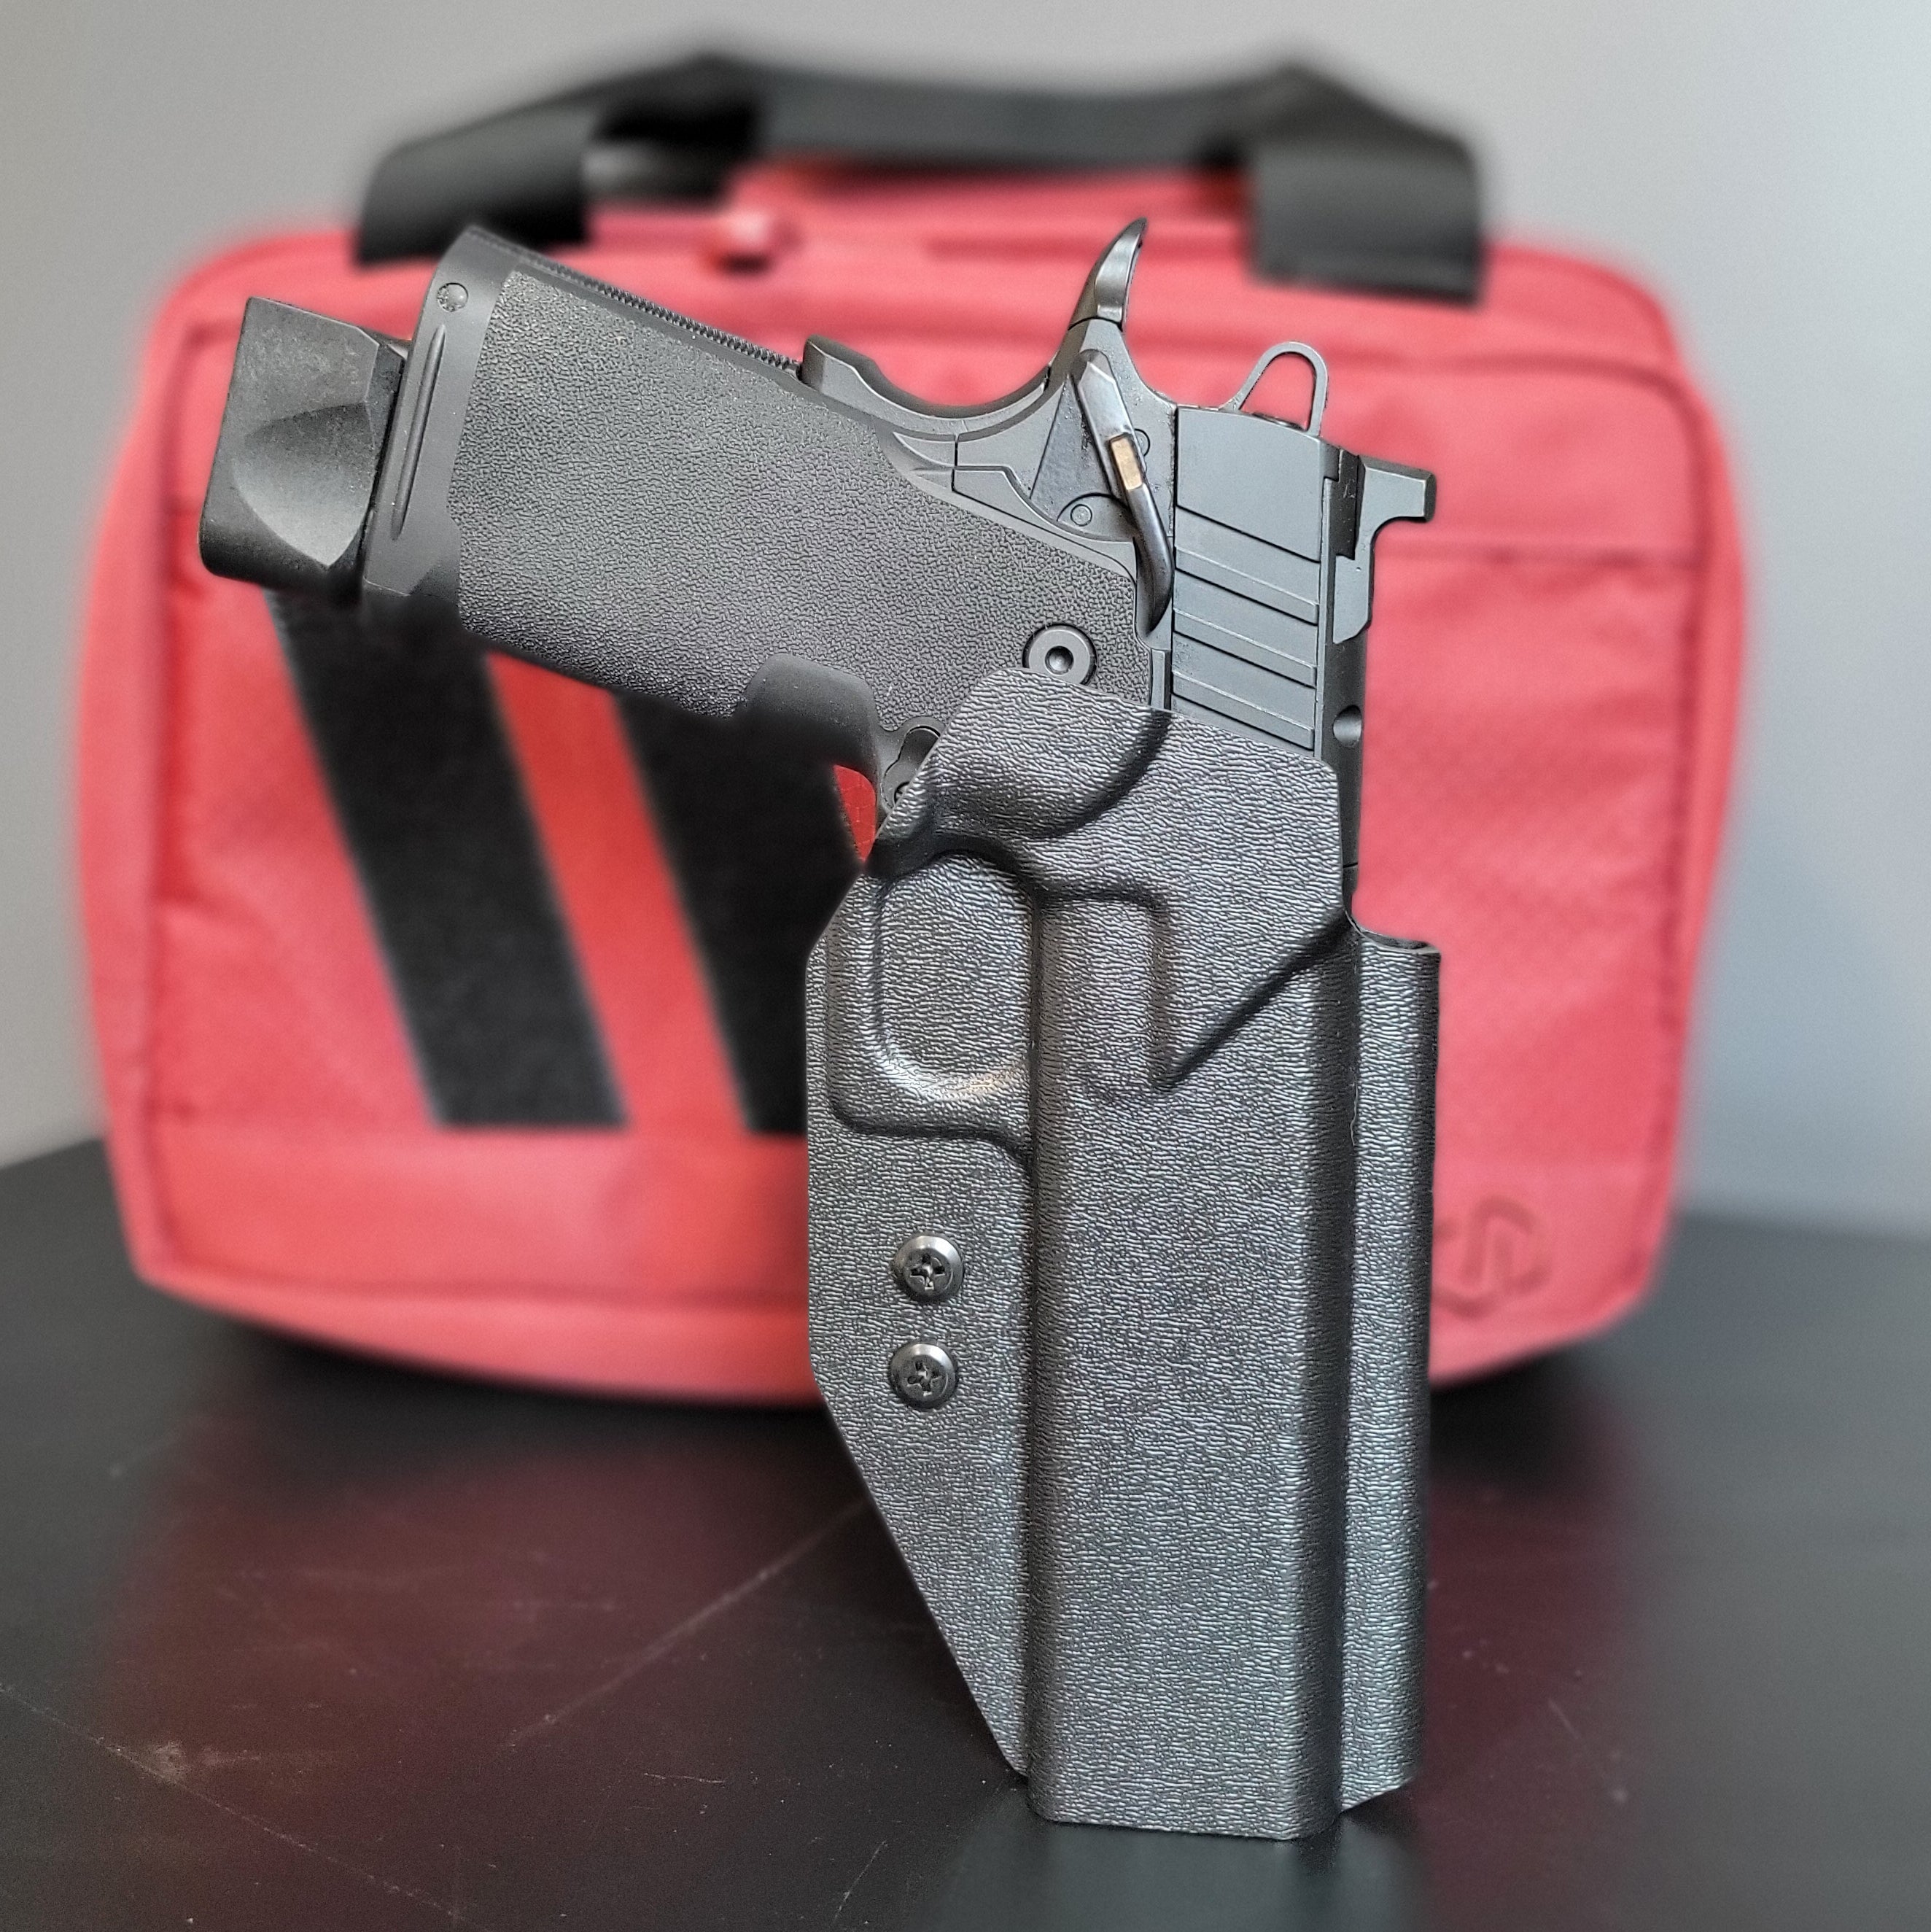 For the best Outside Waistband kydex Holster designed to fit the Springfield Armory 1911 DS Prodigy 5" & 4.25" with or without a red dot sight mounted to the pistol, shop to Four Brothers Holsters. Full sweat guard, adjustable retention, minimal material, & smooth for reduced printing. Proudly made in the USA